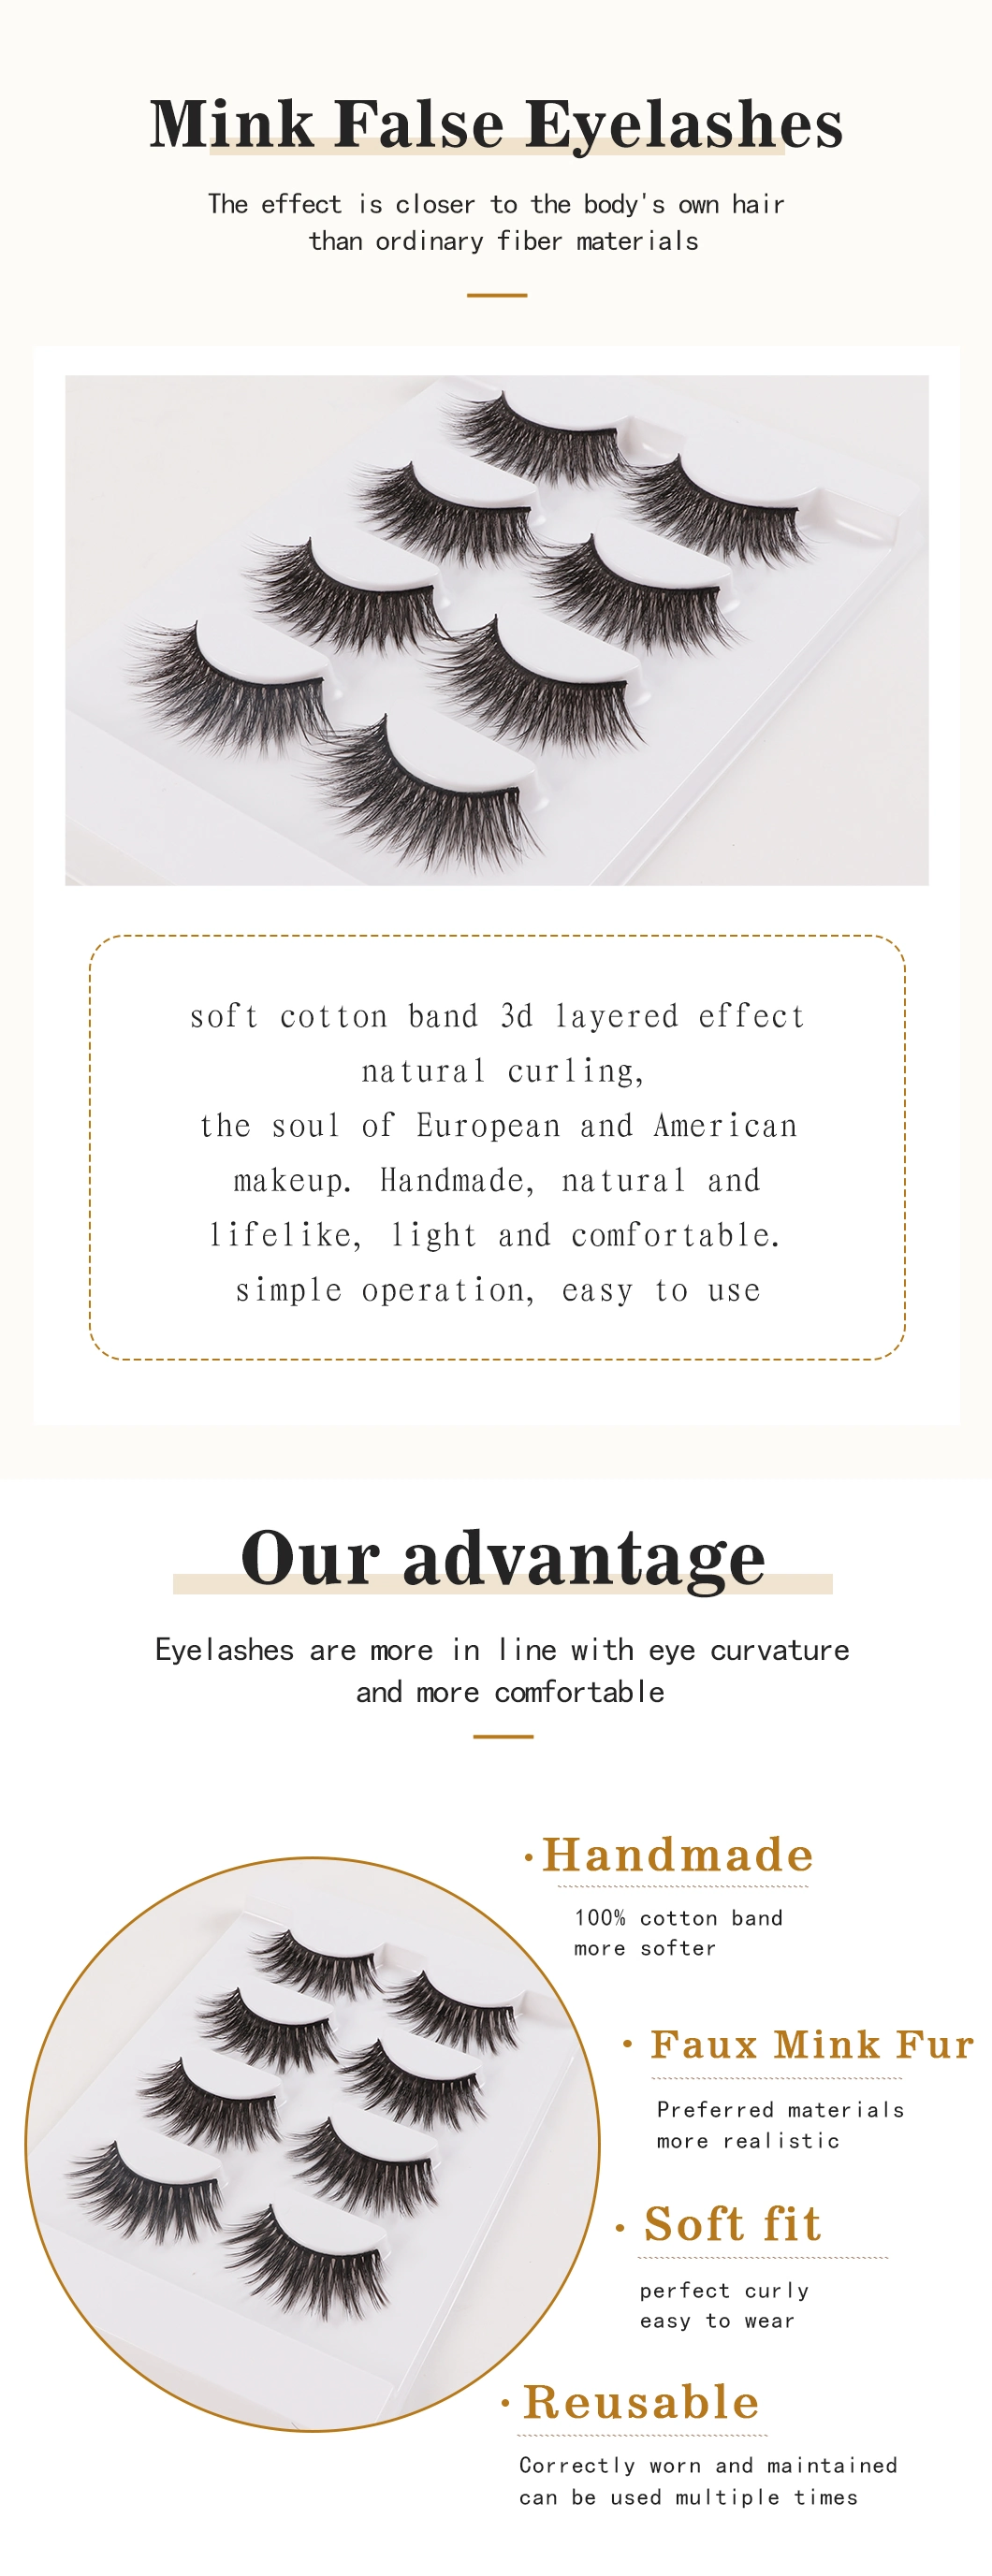 Newest 3D 5D Faux Mink Eyelashes Extension Silk Strip Private Label Lashes Cosmetic 3D Mink Eyelashes